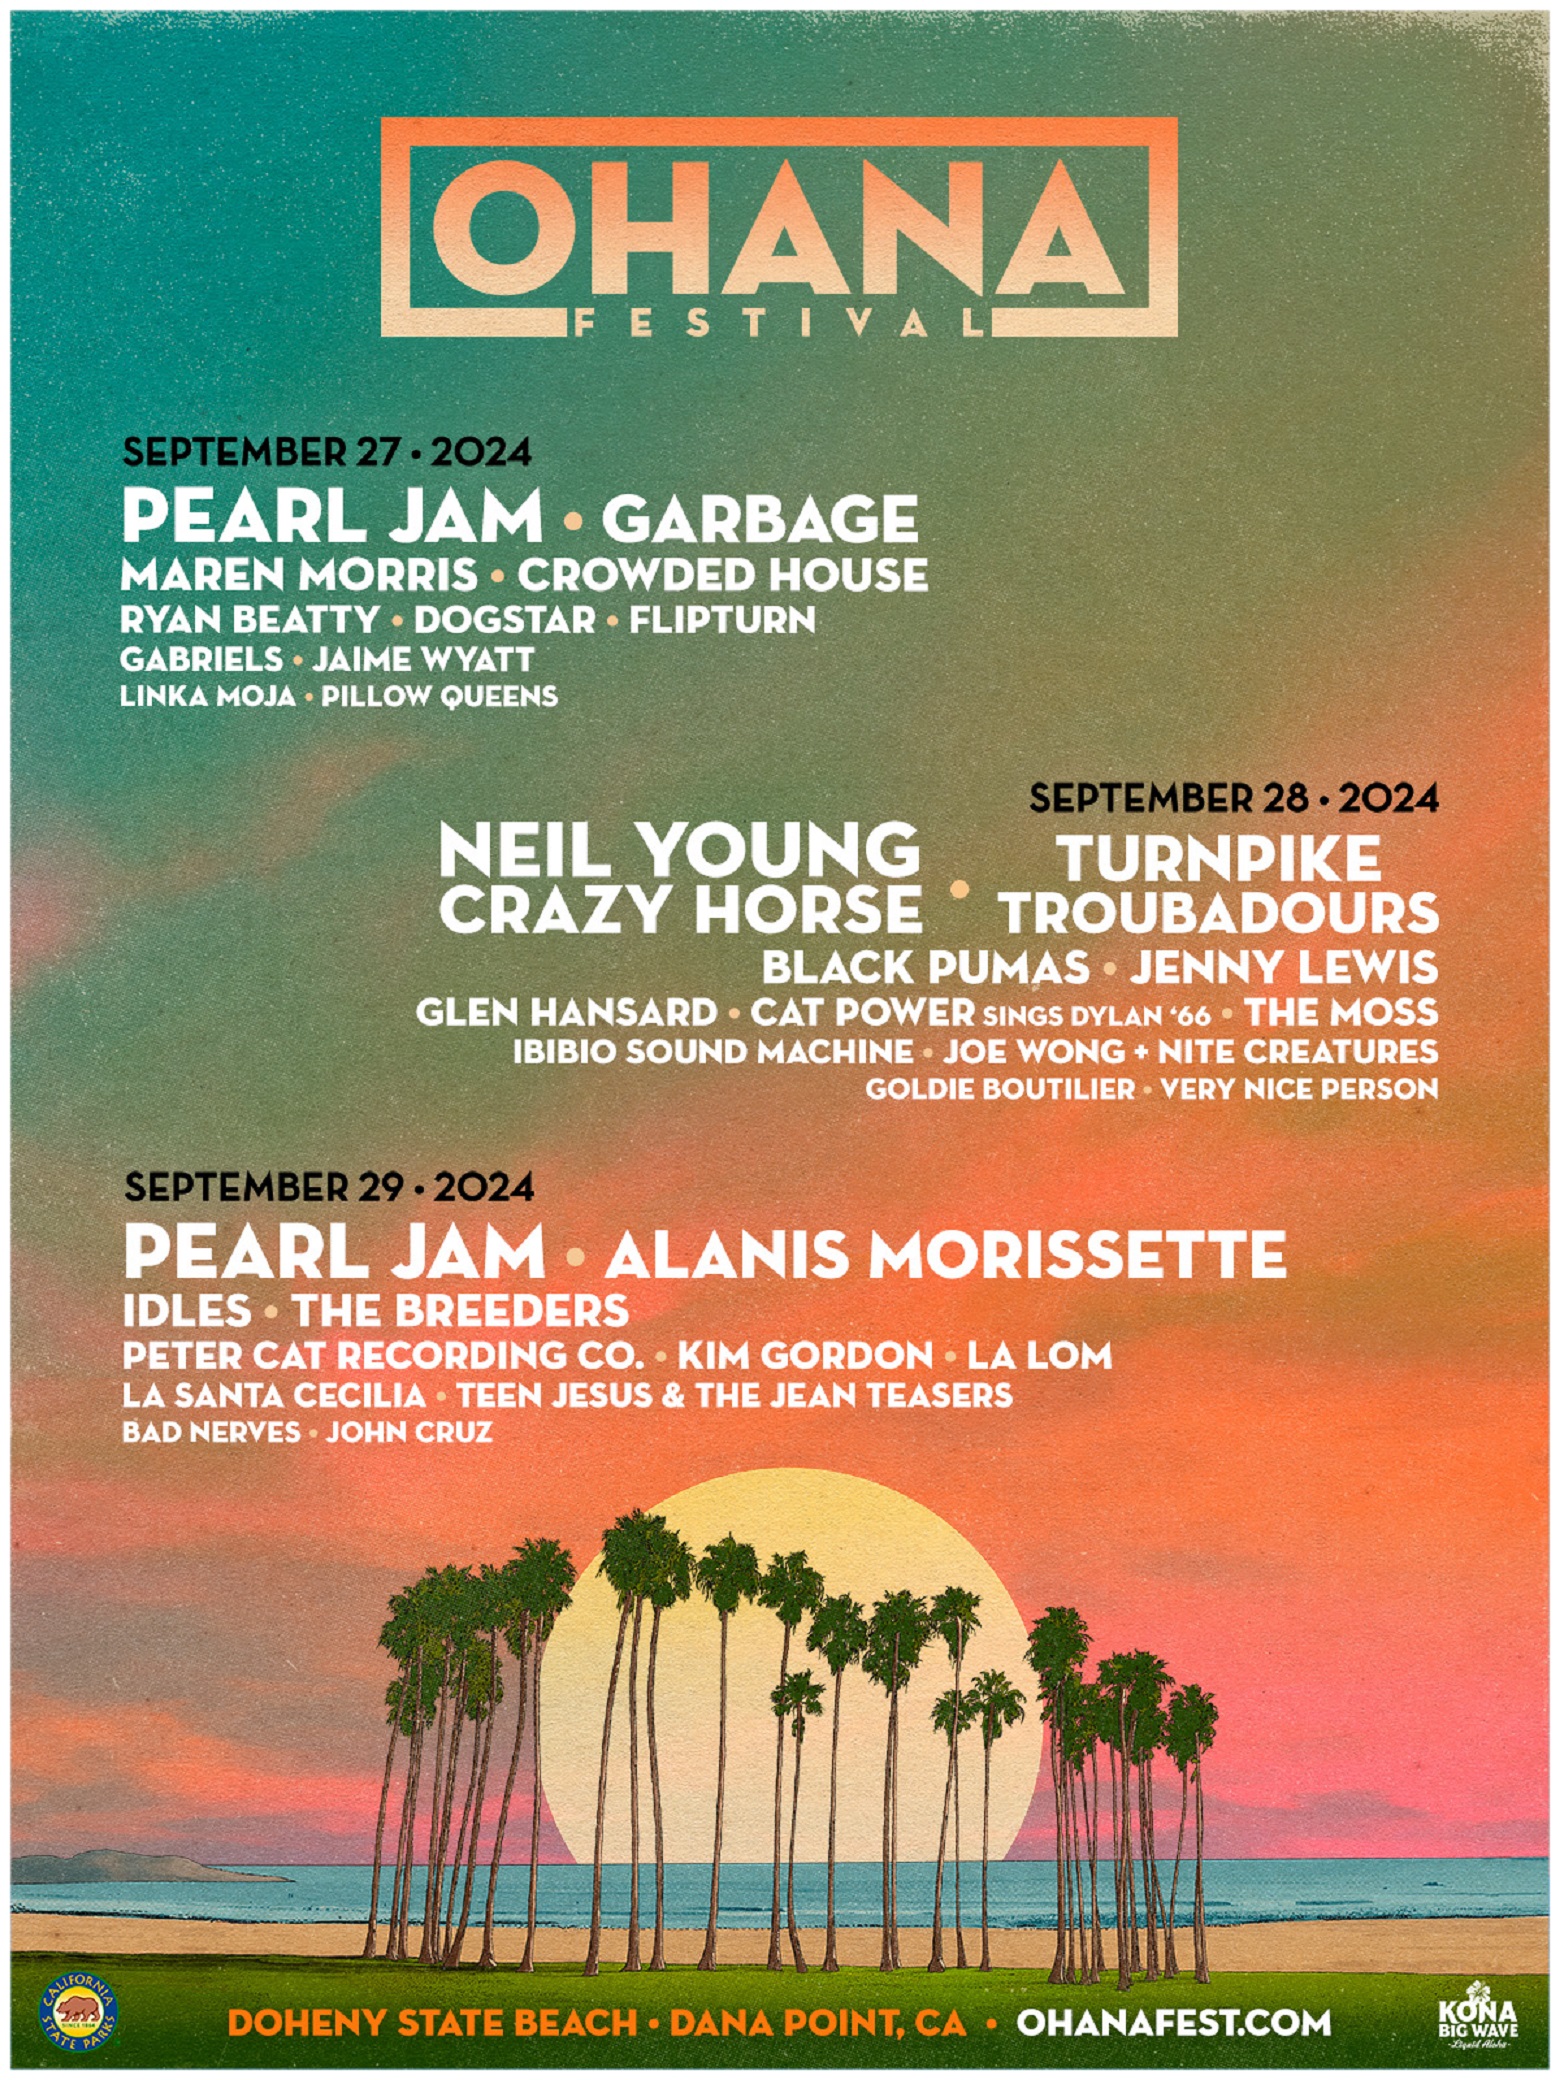 Ohana Festival Returns to Doheny State Beach with Headliners Pearl Jam and Neil Young